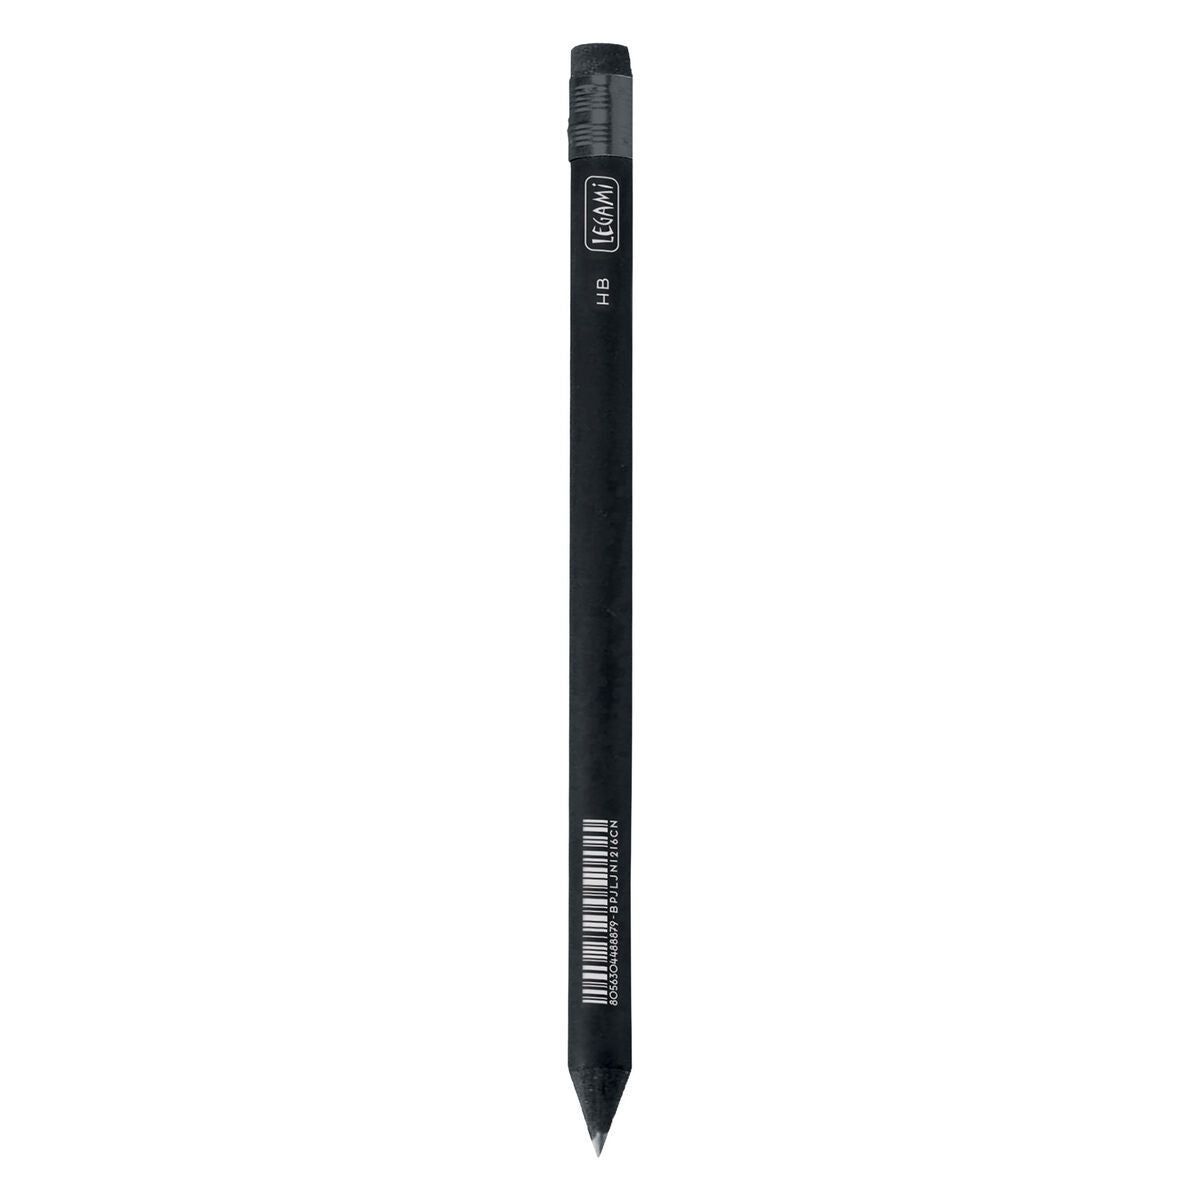 Back to School | Legami Black Pencil With Eraser by Weirs of Baggot St